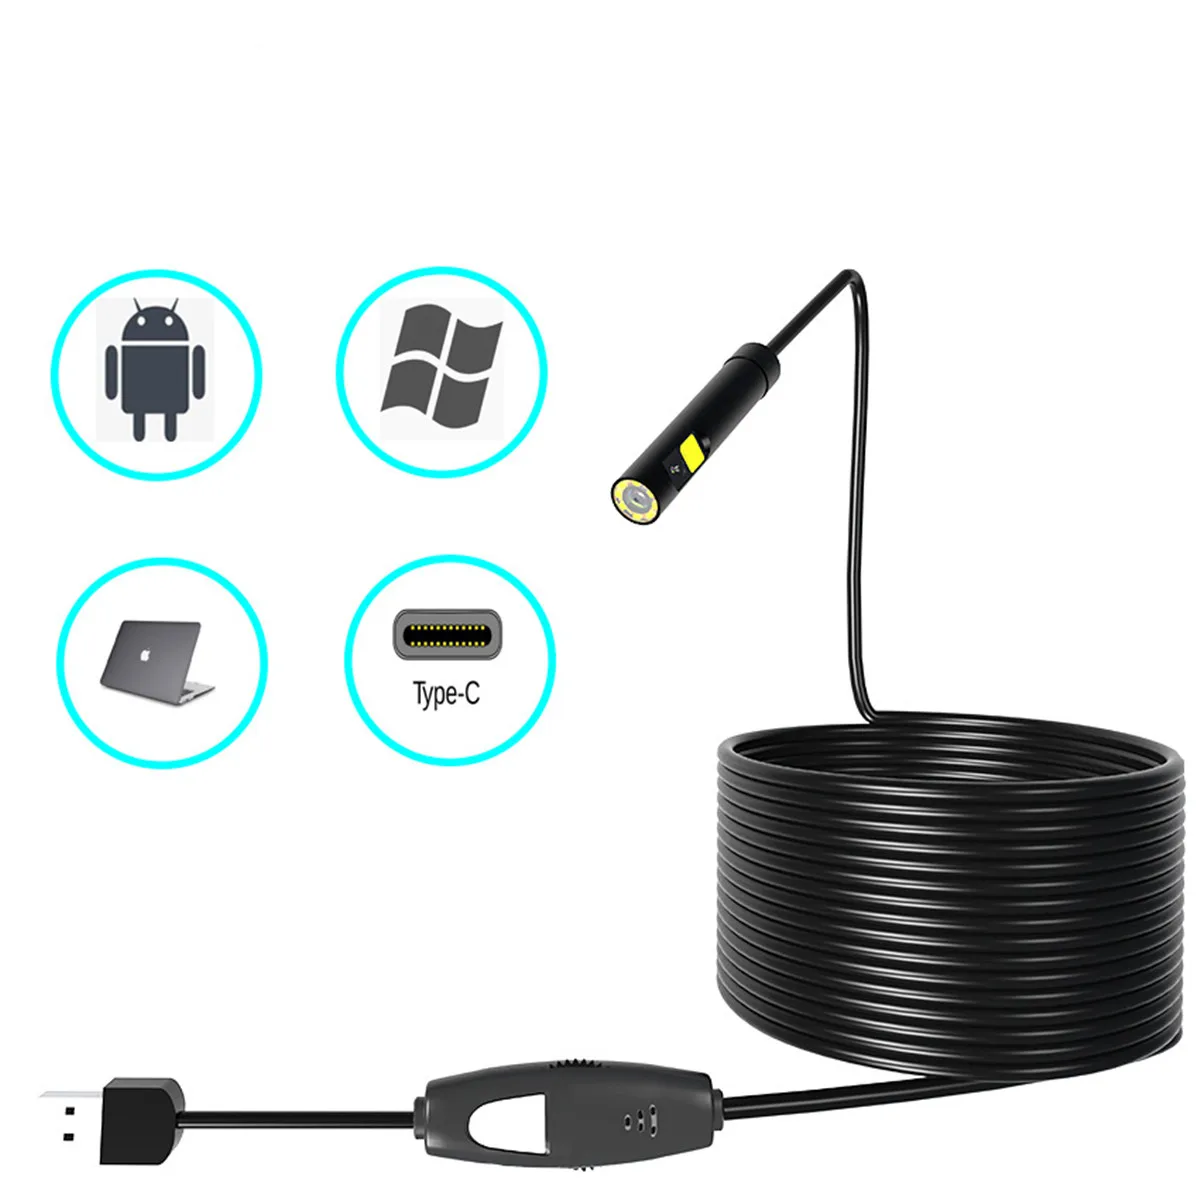 2MP 8MM 3in1 USB Dual Lens Endoscope Camera For Android&Computer CMOS Borescope Inspection  Digital Microscope Otoscope an100 inspection endoscope 8mm dual lens 9 pcs led ip67 waterproof camera 10m cable 3in1 micro cord usb type c for android pc